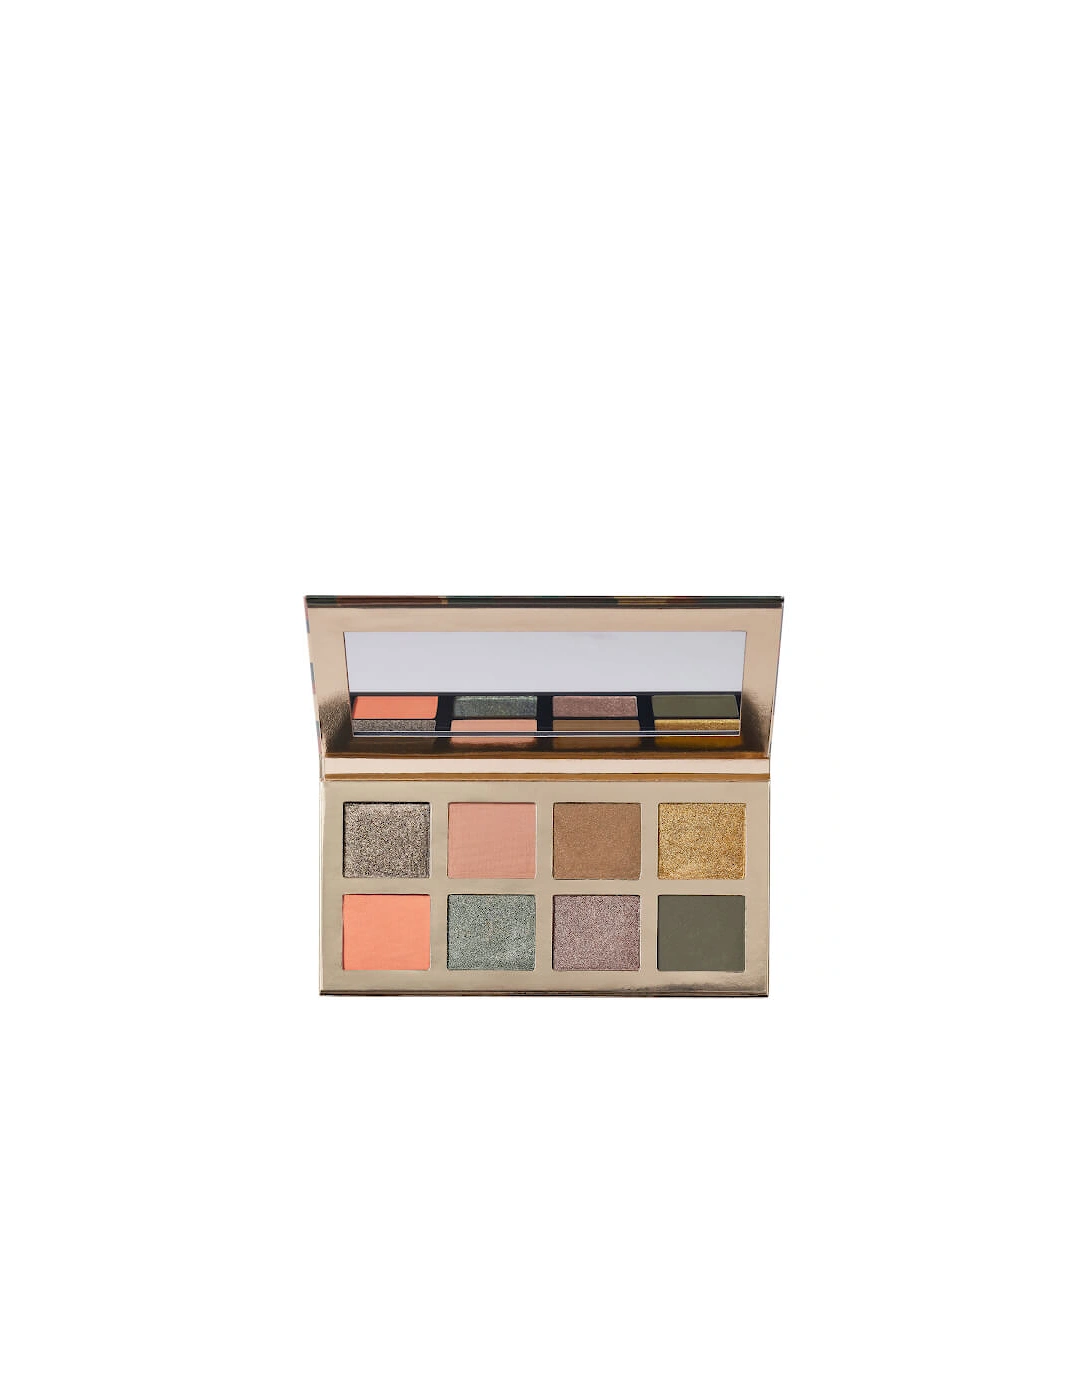 Camouflage Beauty Eye Shadow Palette 7.89g, 2 of 1